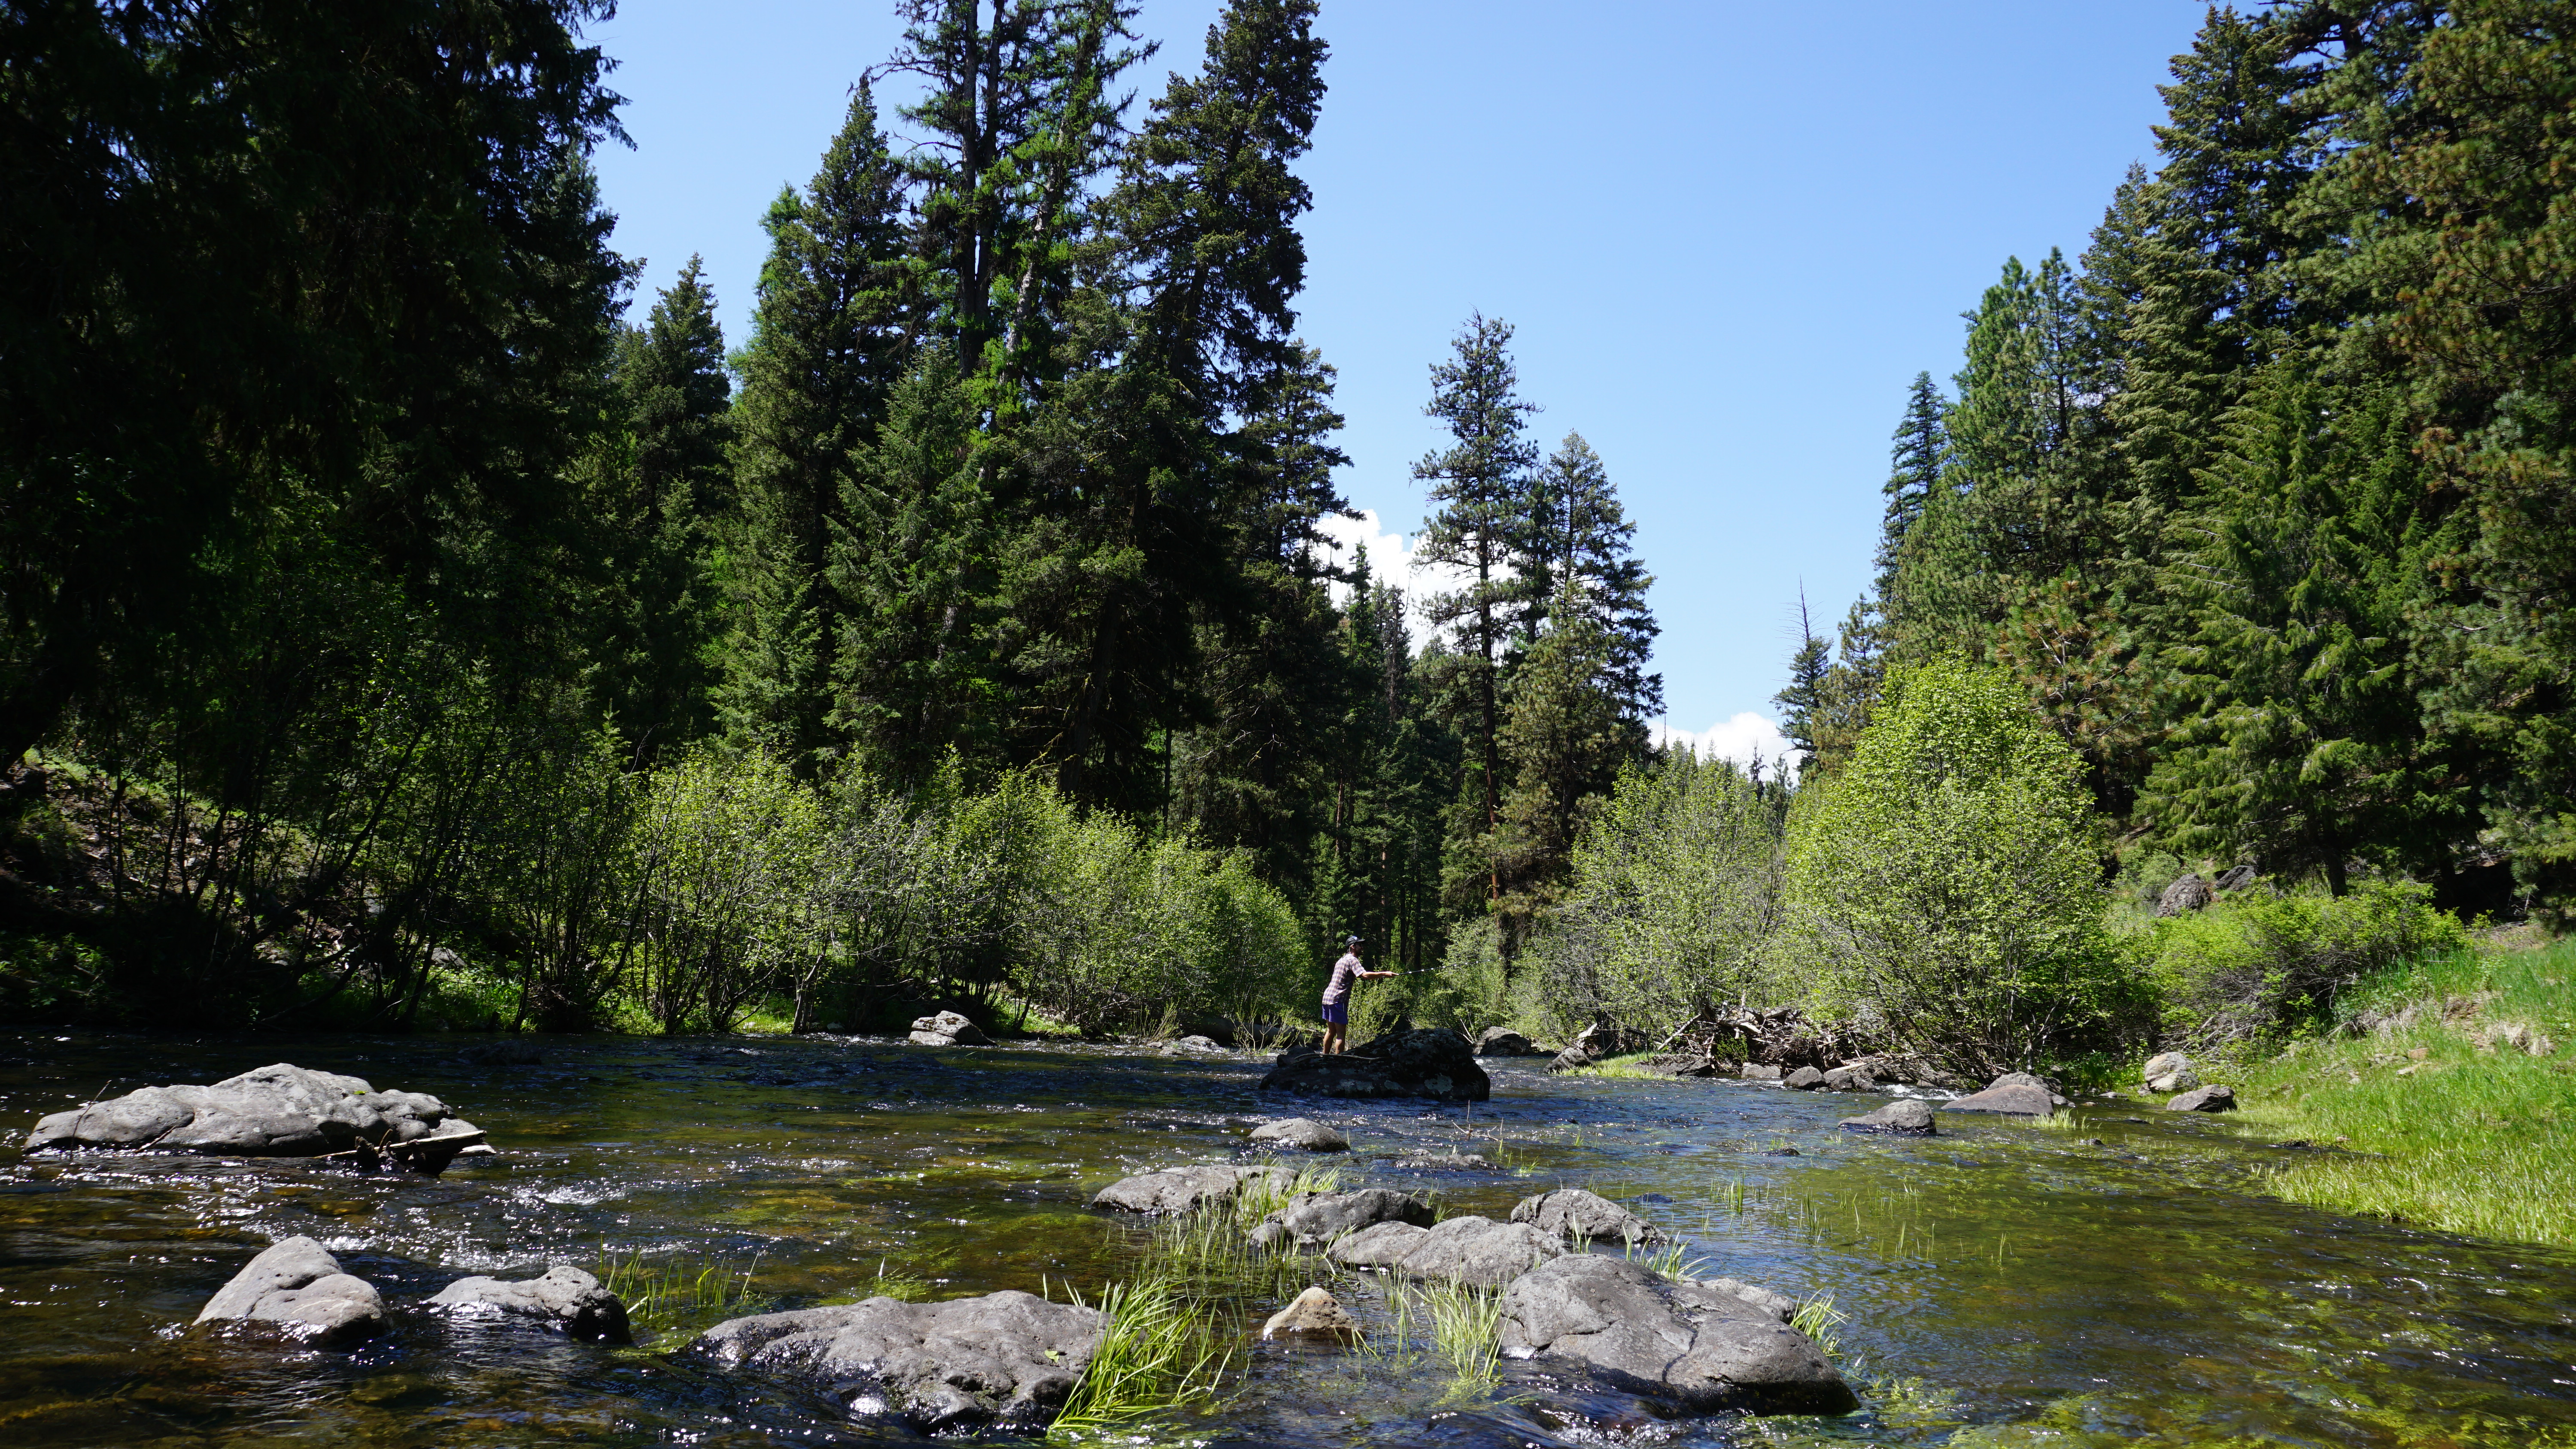 An angler fishing for redband trout in a Central Oregon stream